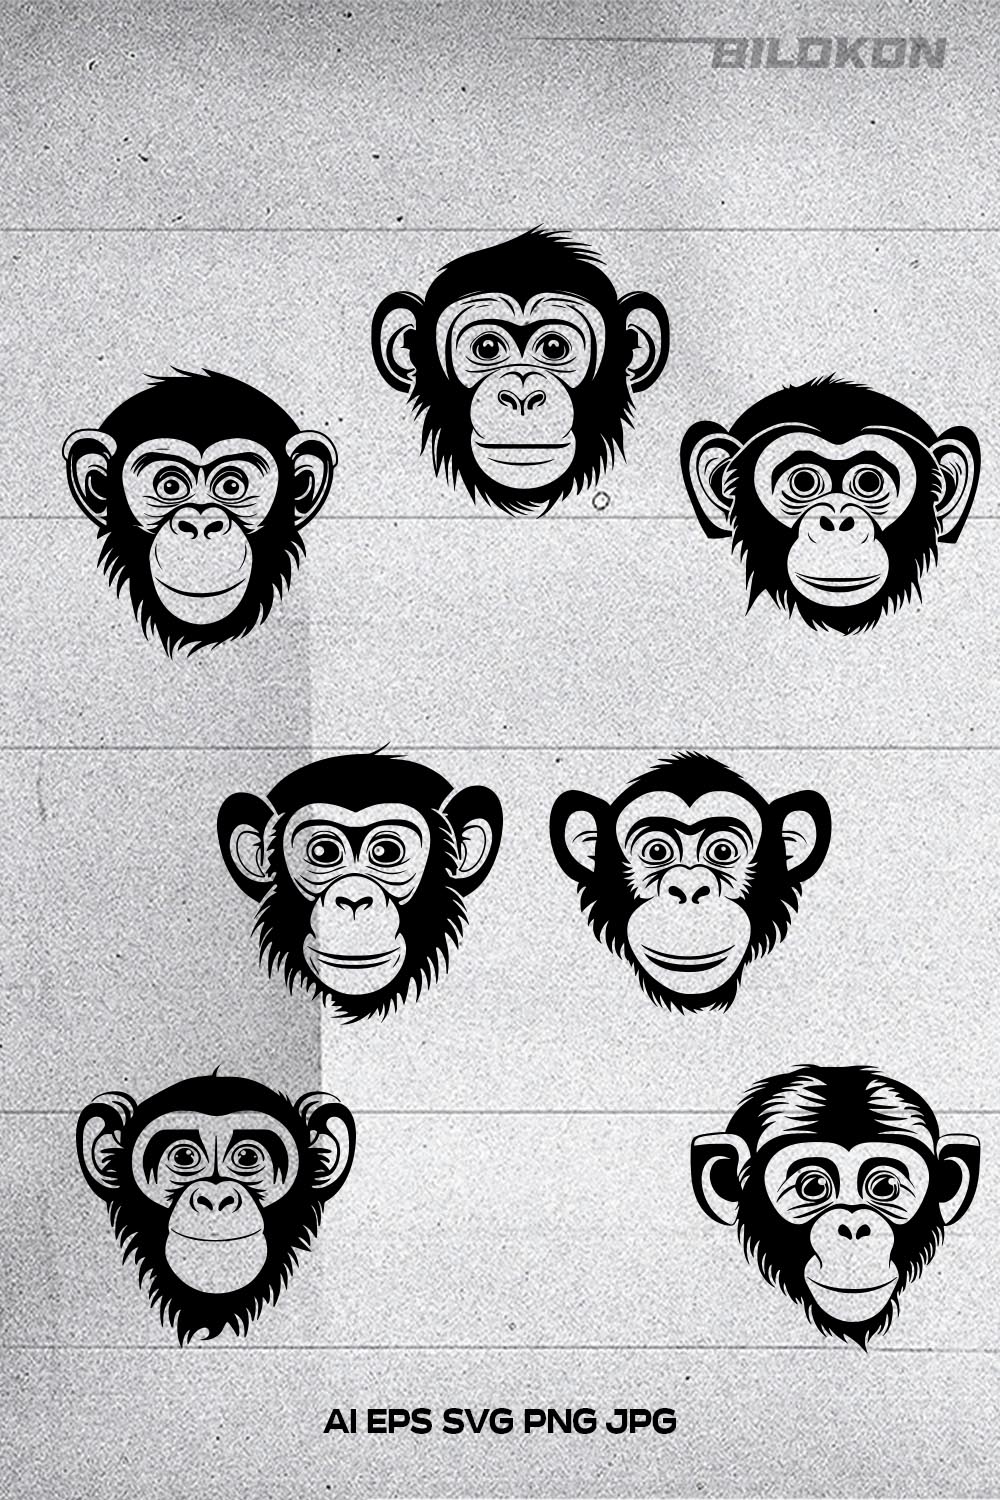 Monkey head, monkey face vector Illustration, on a isolated background, SVG pinterest preview image.